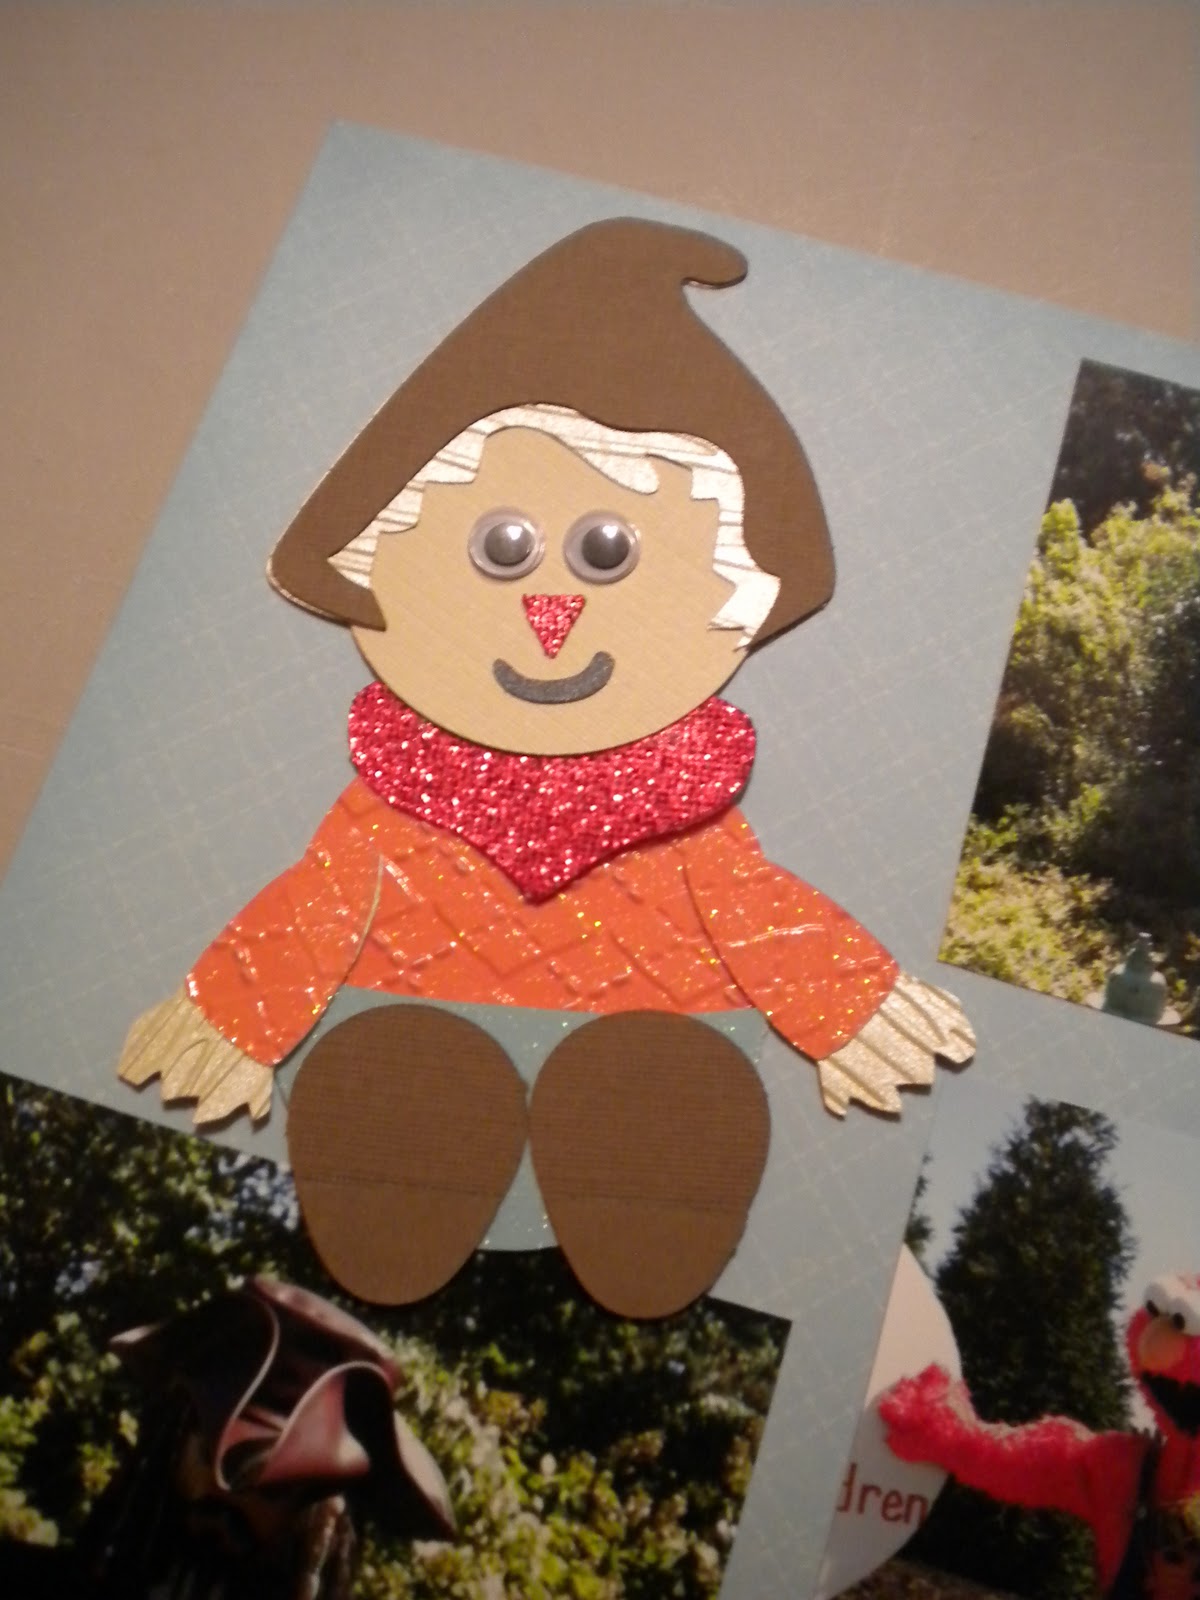 Jean's Crafty Corner: Scarecrow Trail - Scrapbooking lots of picks on a ...